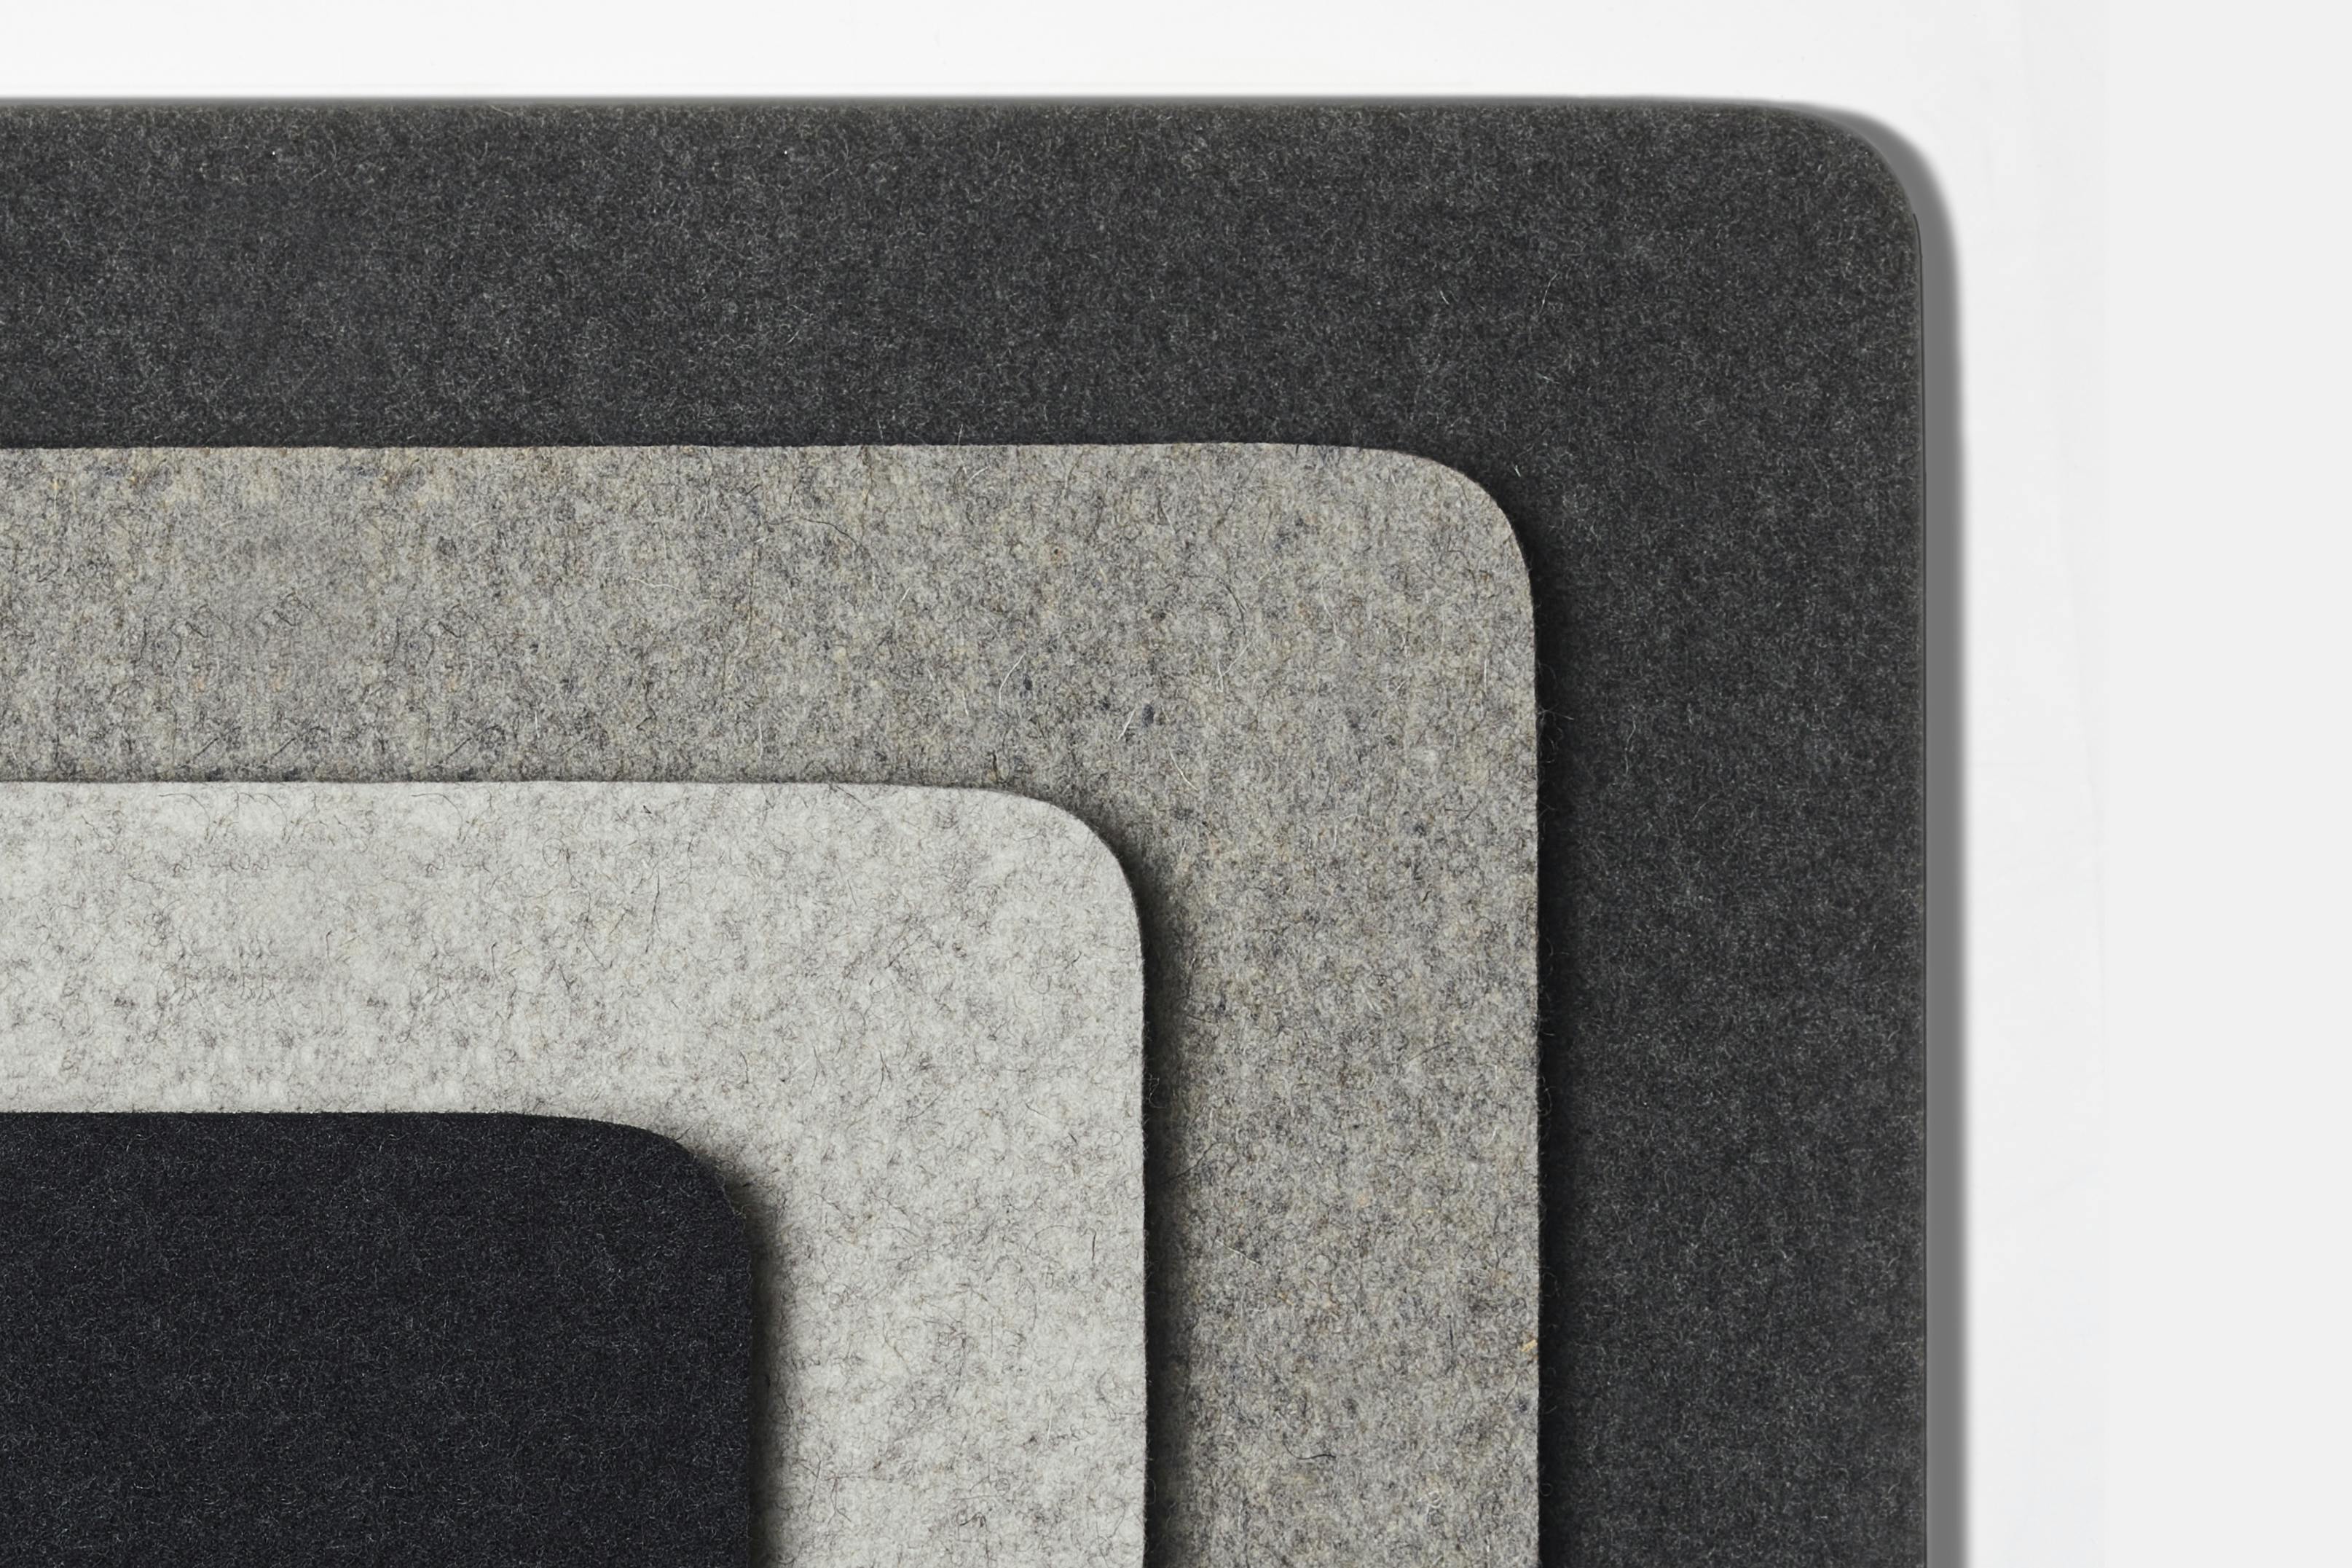 PDP Image: Felt Tops (The Nightstand / Heathered Grey) - 3:2 - Four Stacked